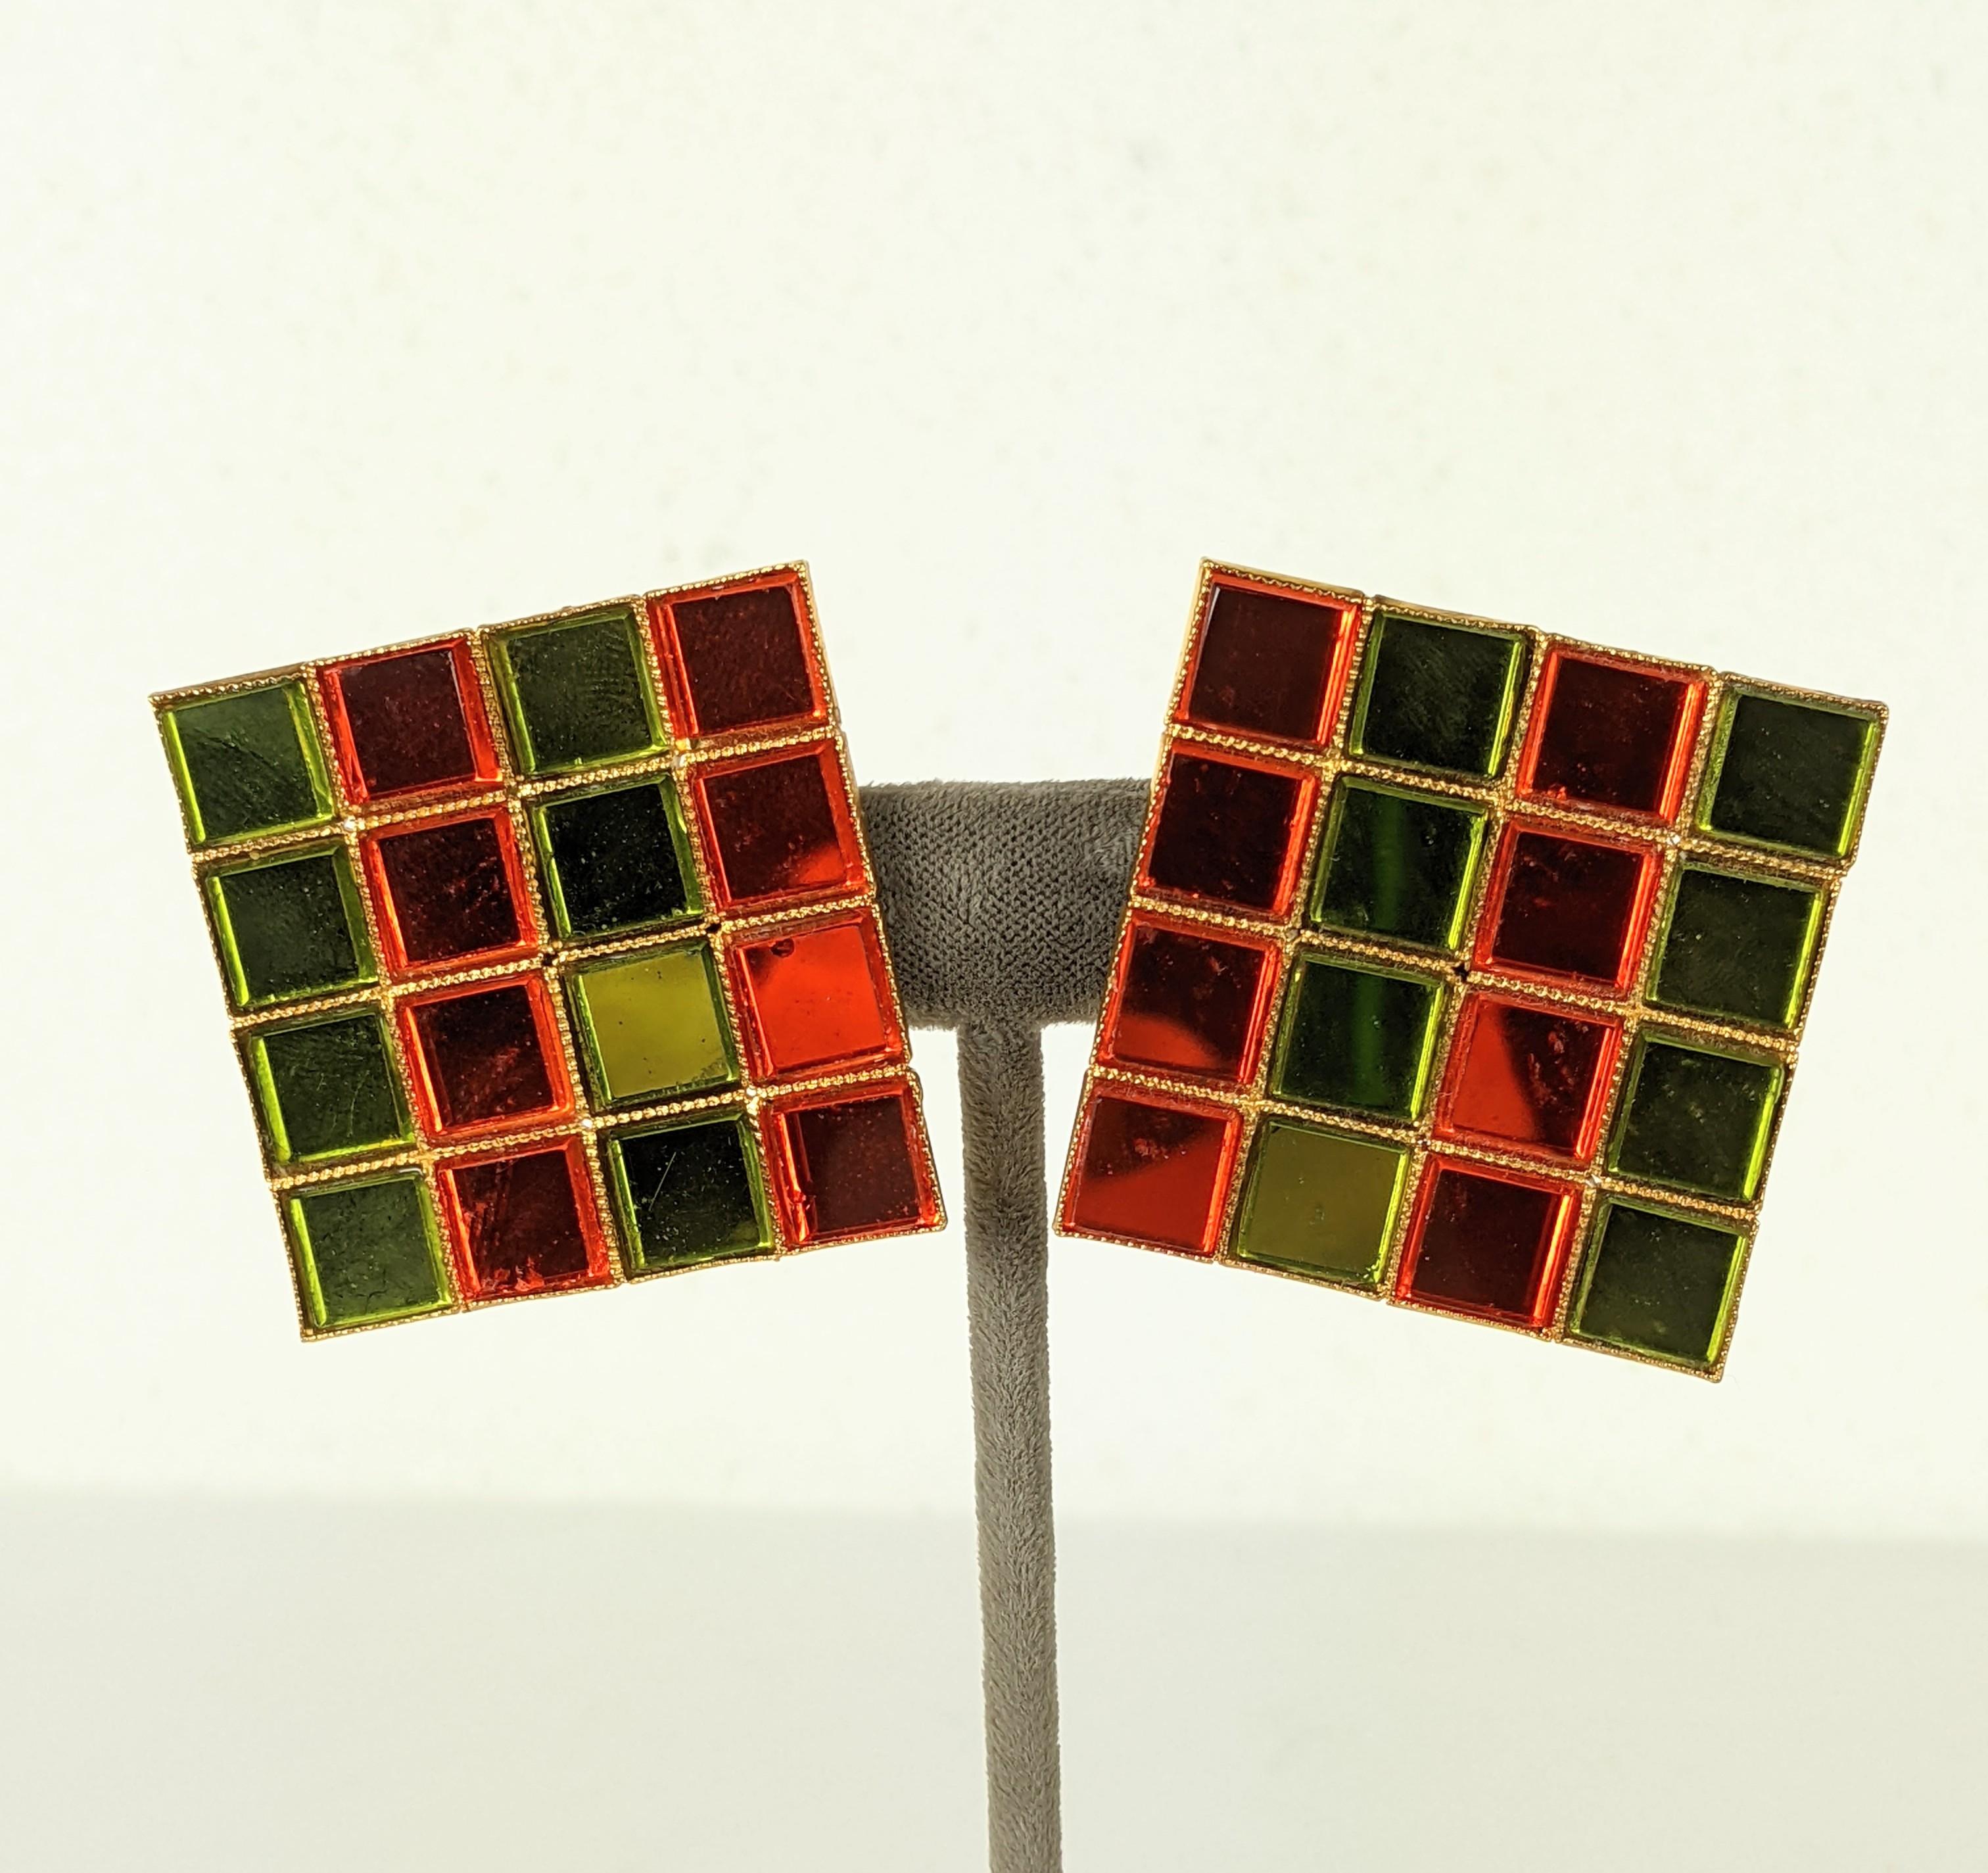 Yves Saint Laurent Mirror Tile Ear clips from the 1980's. Signature mirror tile stones in orange and olive used only by YSL for incredible graphic color.  Clip back fittings. 
1980's France,   1.75